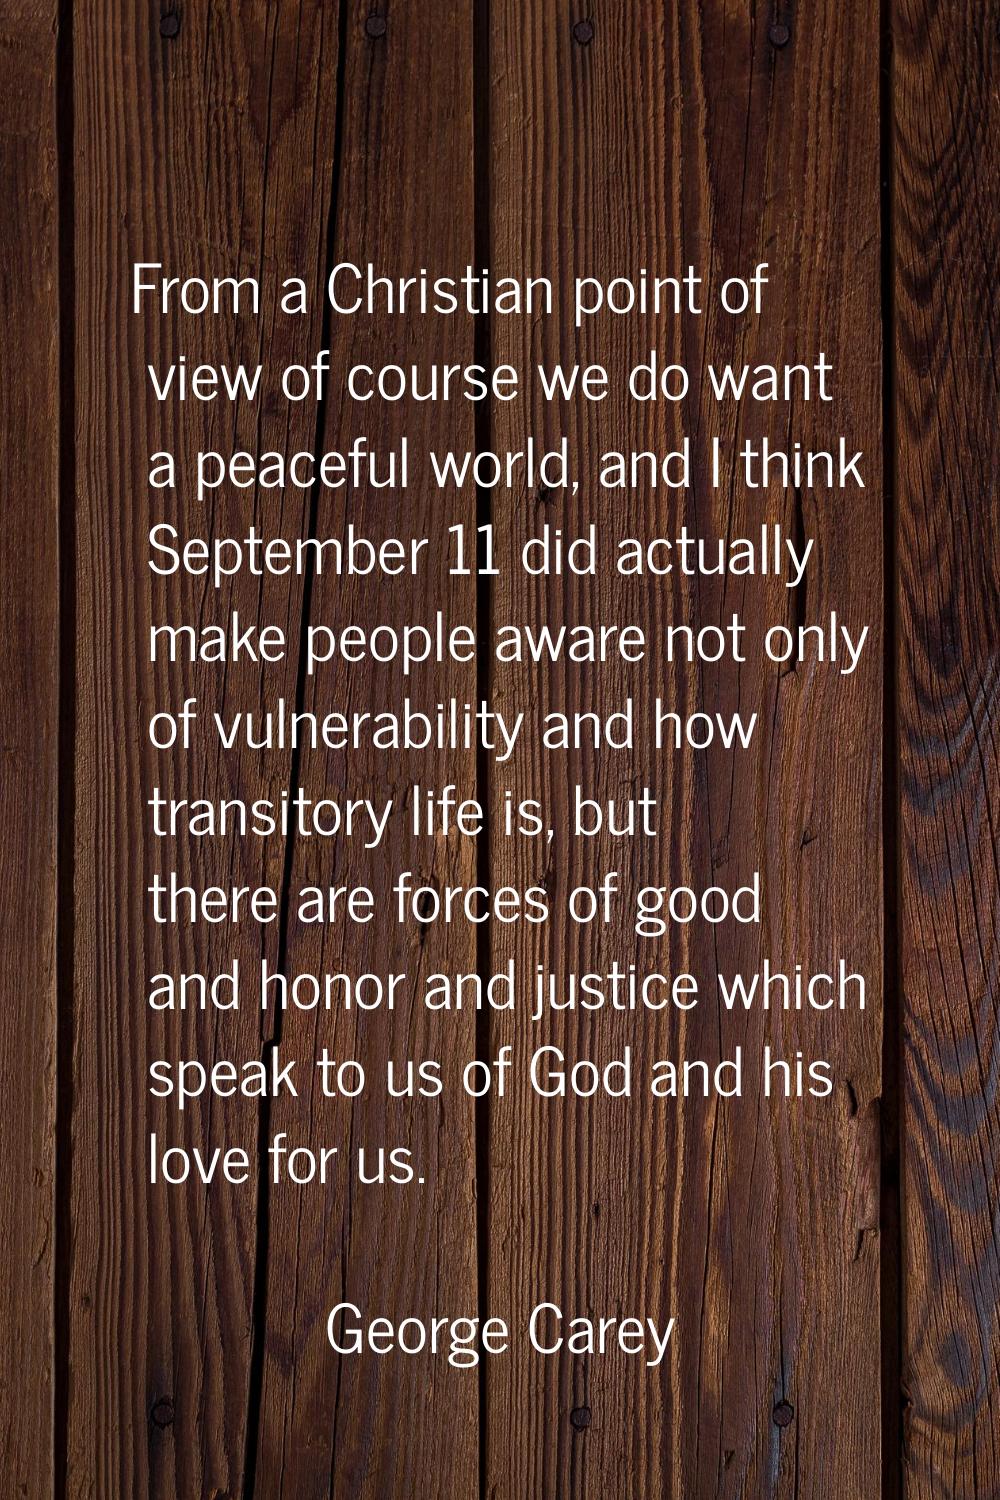 From a Christian point of view of course we do want a peaceful world, and I think September 11 did 